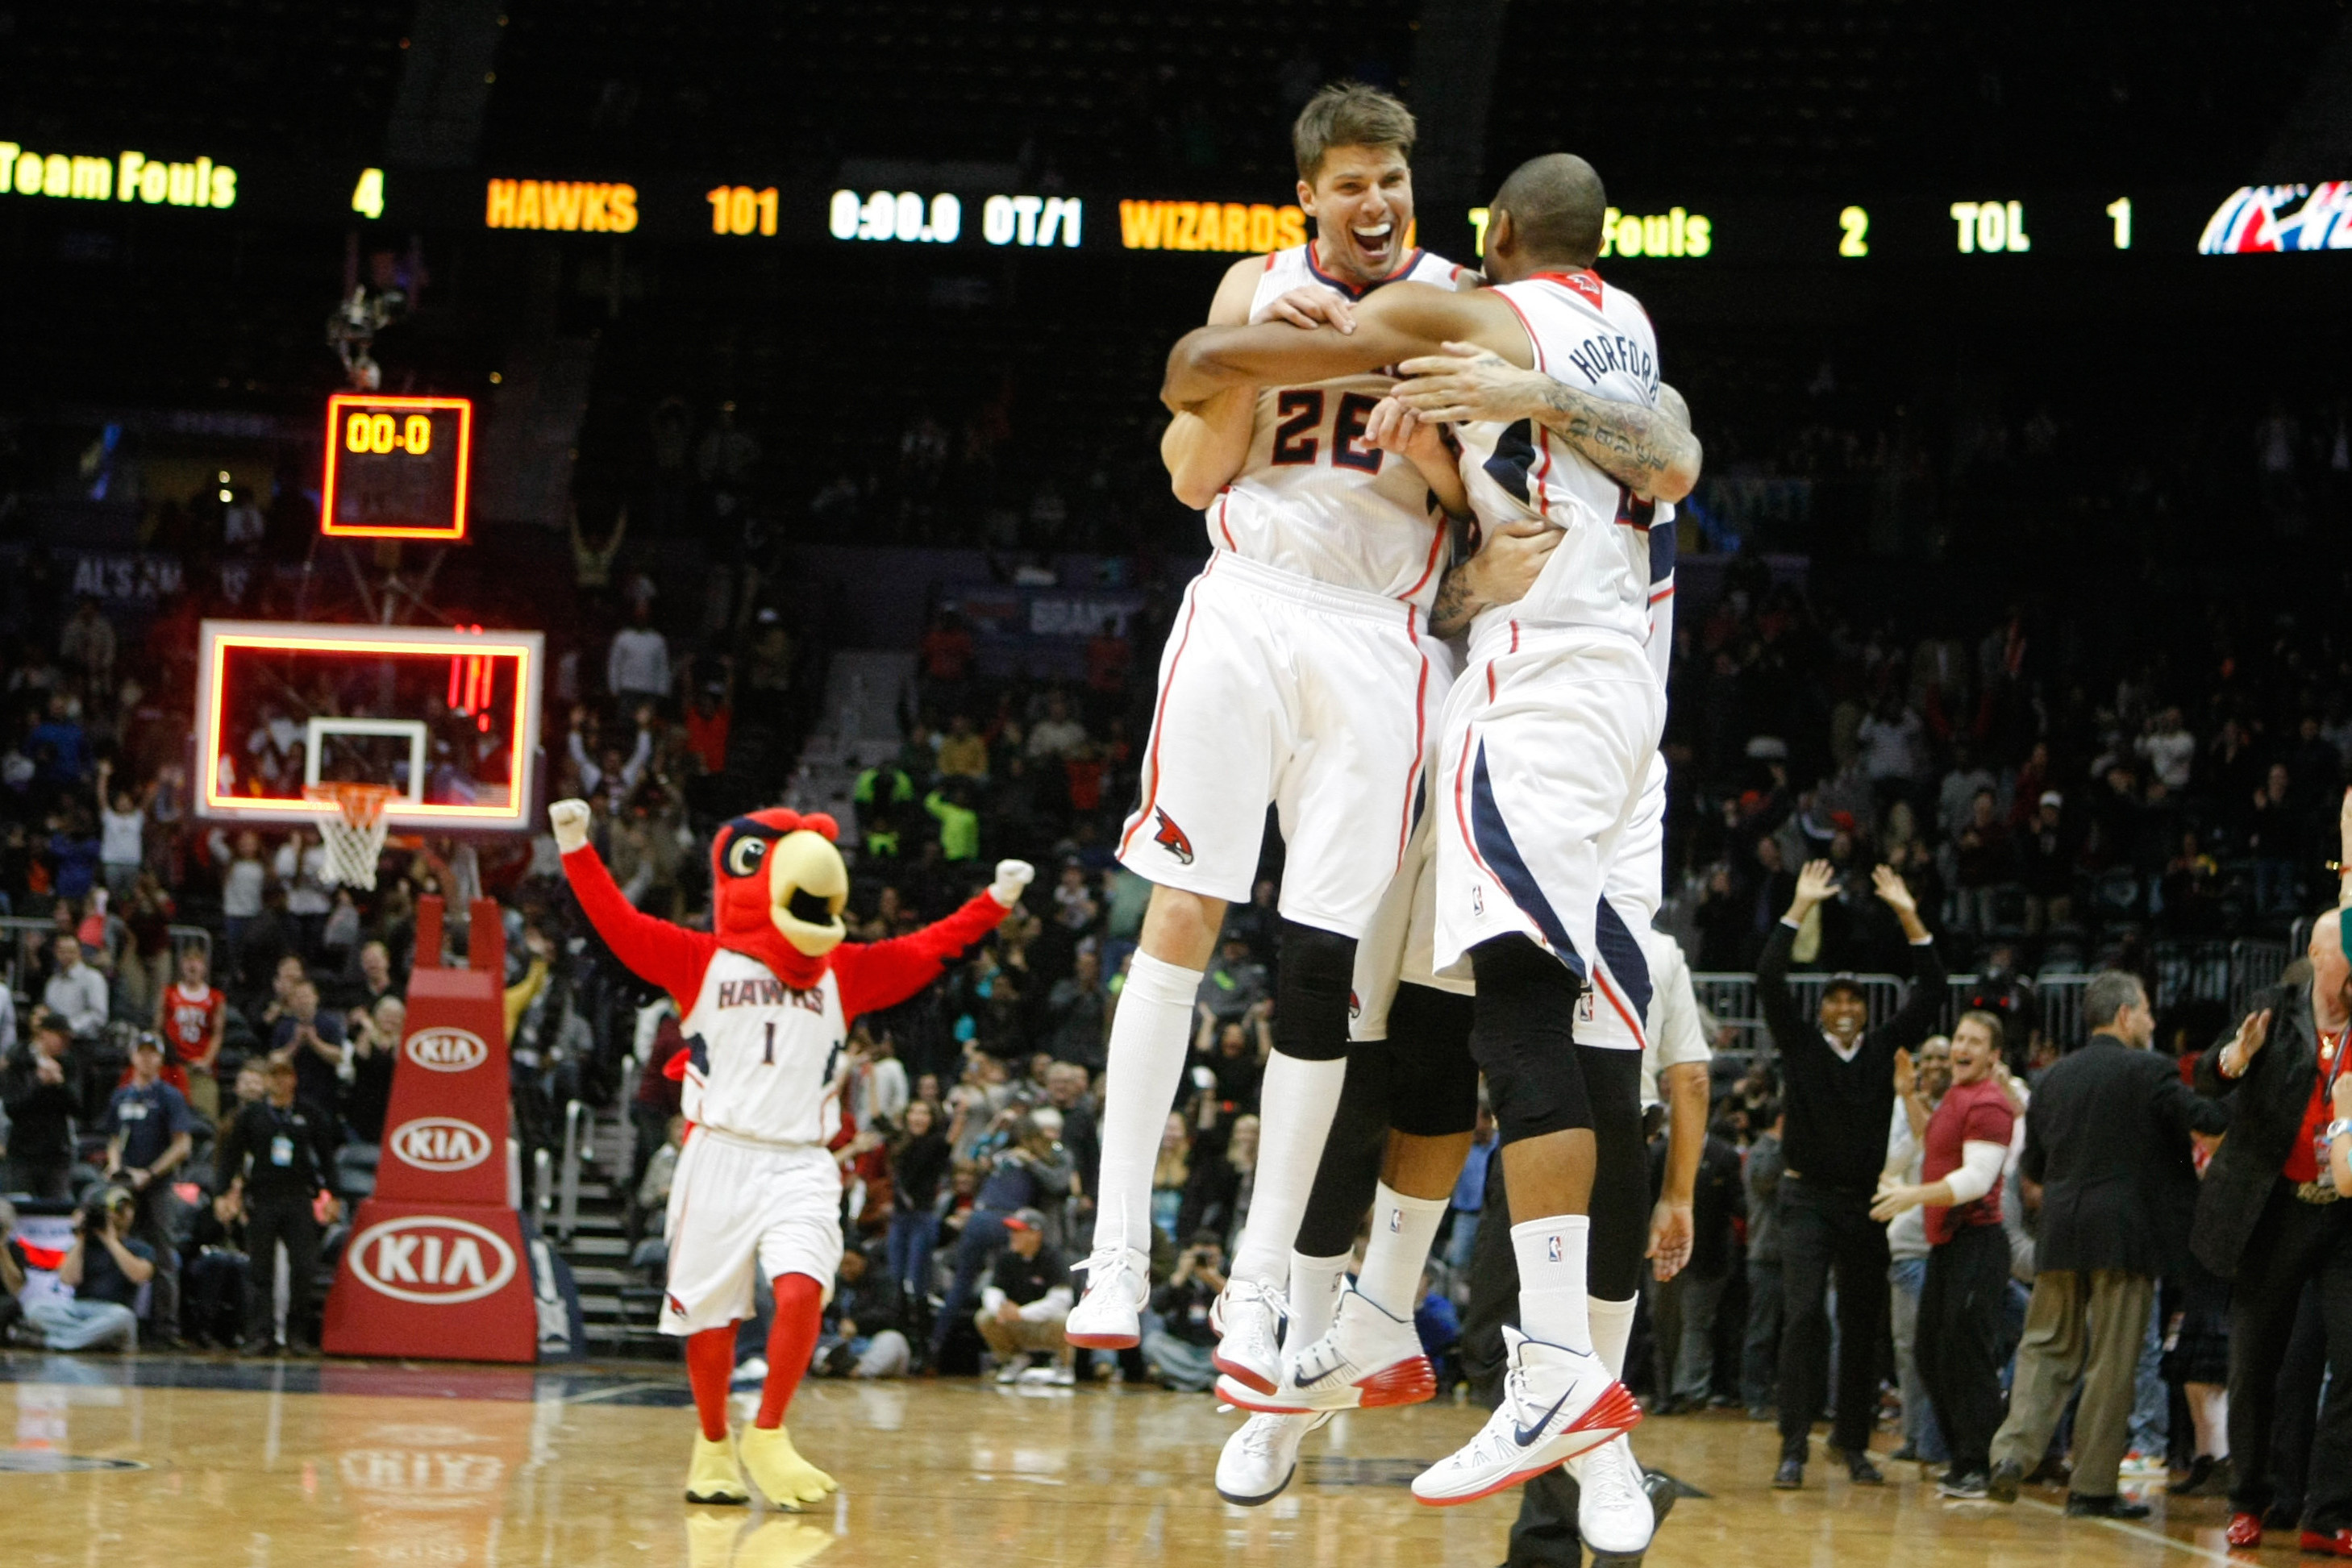 Dec 13, 2013; Atlanta, GA, USA; Atlanta Hawks shooting guard Kyle Korver (26) and center Al Horford (15) celebrate a victory against the Washington Wizards in overtime at Philips Arena. The Hawks defeated the Wizards 101-99. Mandatory Credit: Brett Davis-USA TODAY Sports